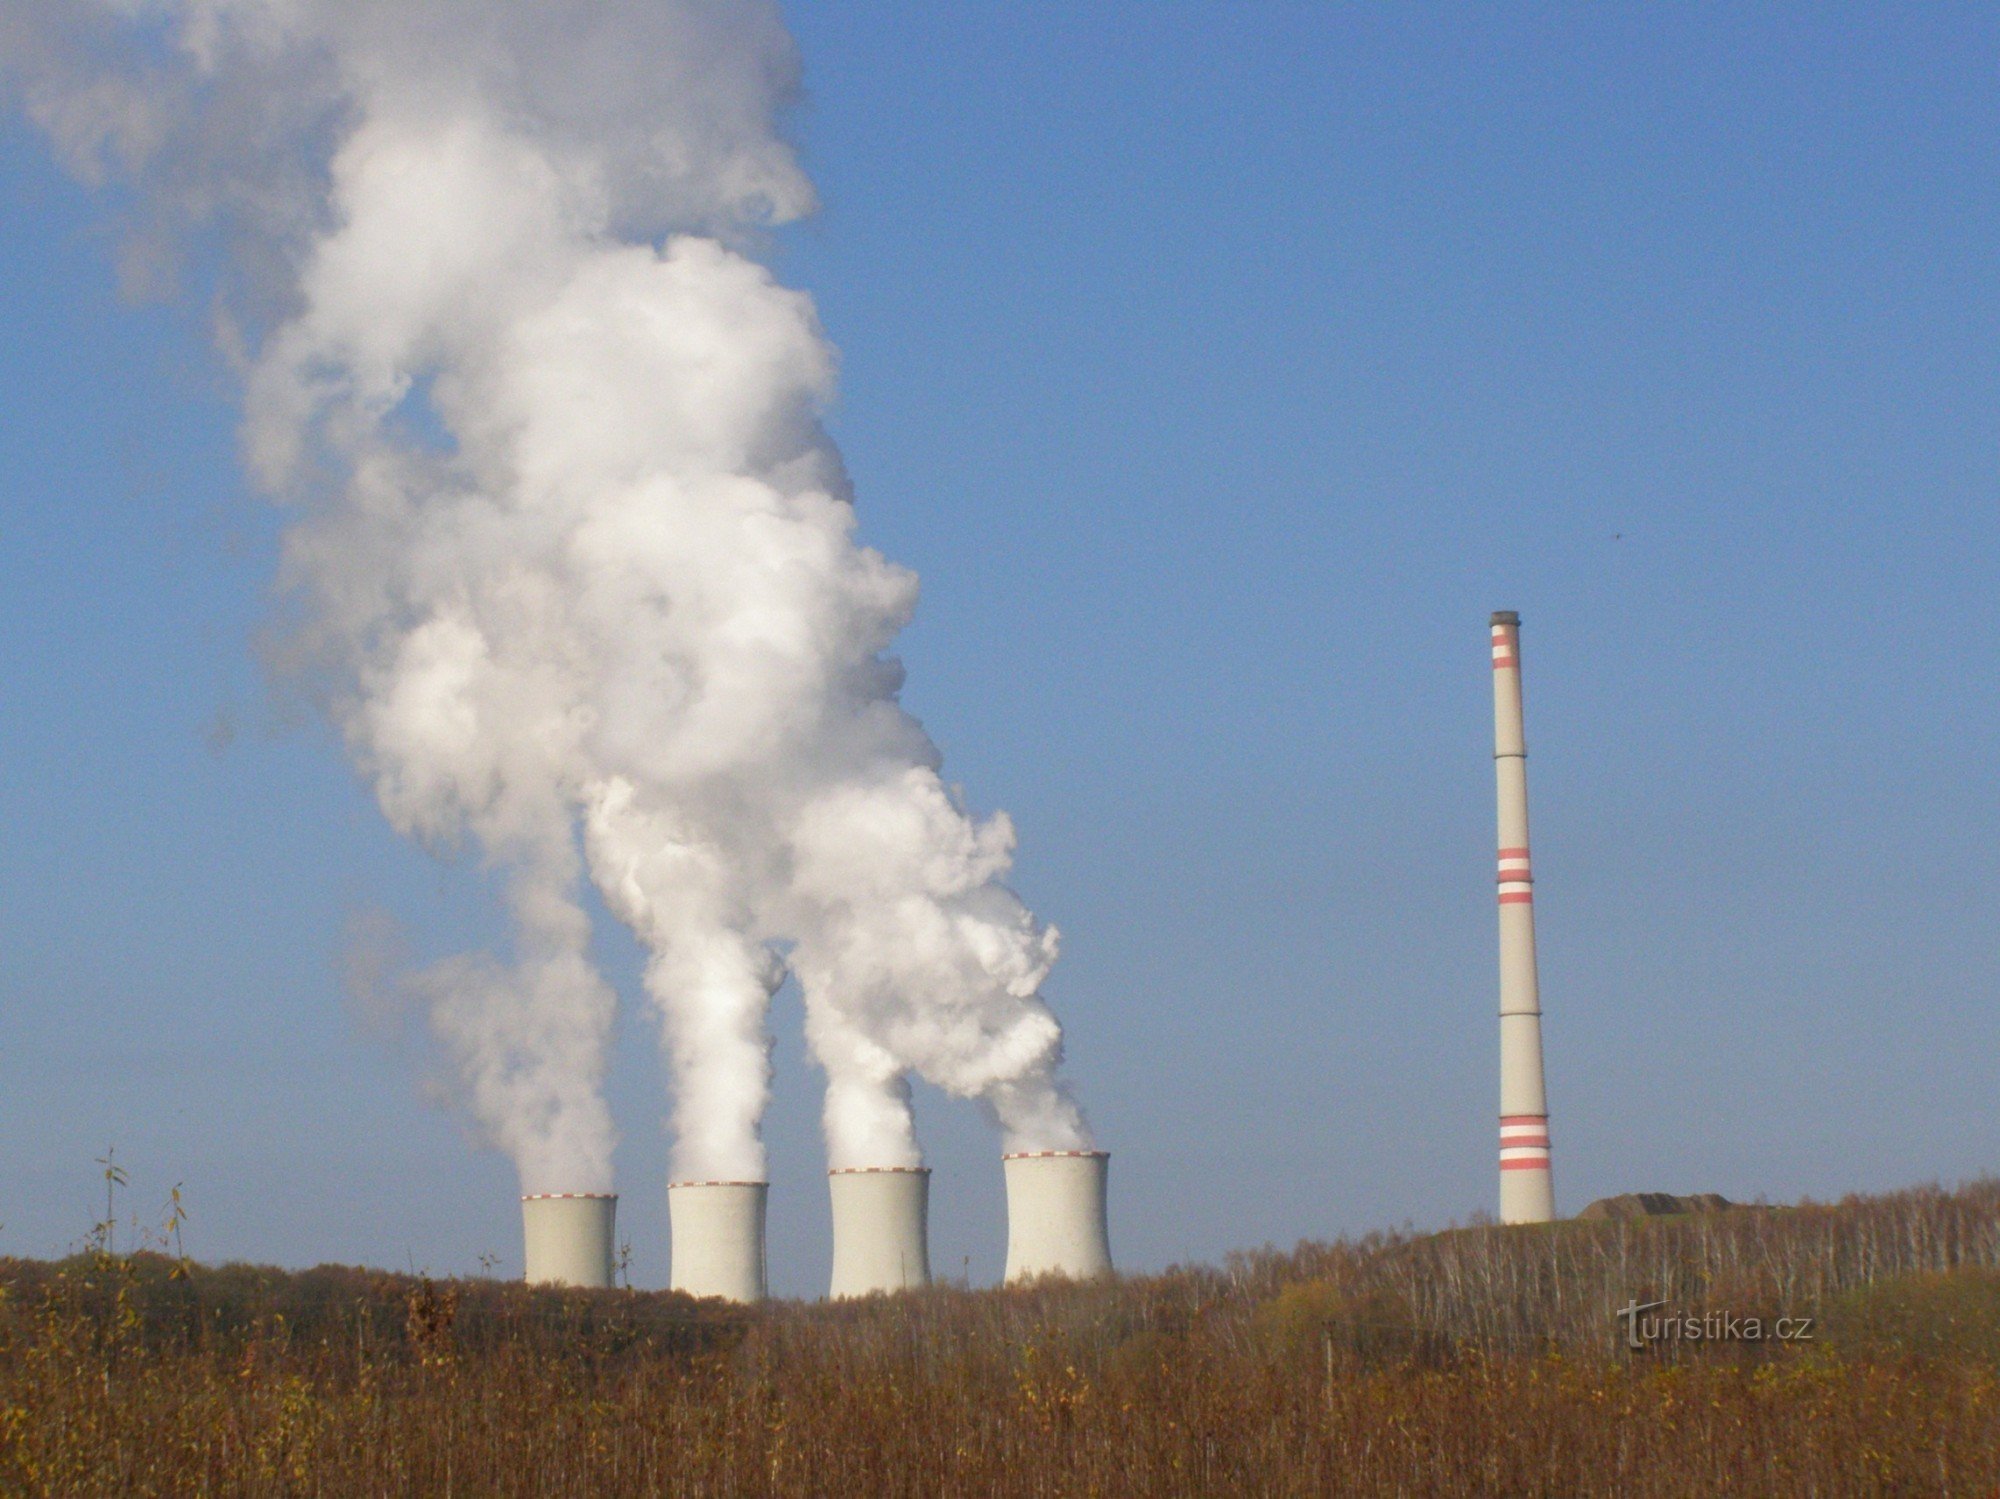 chimneys of the Chvaletice power plant